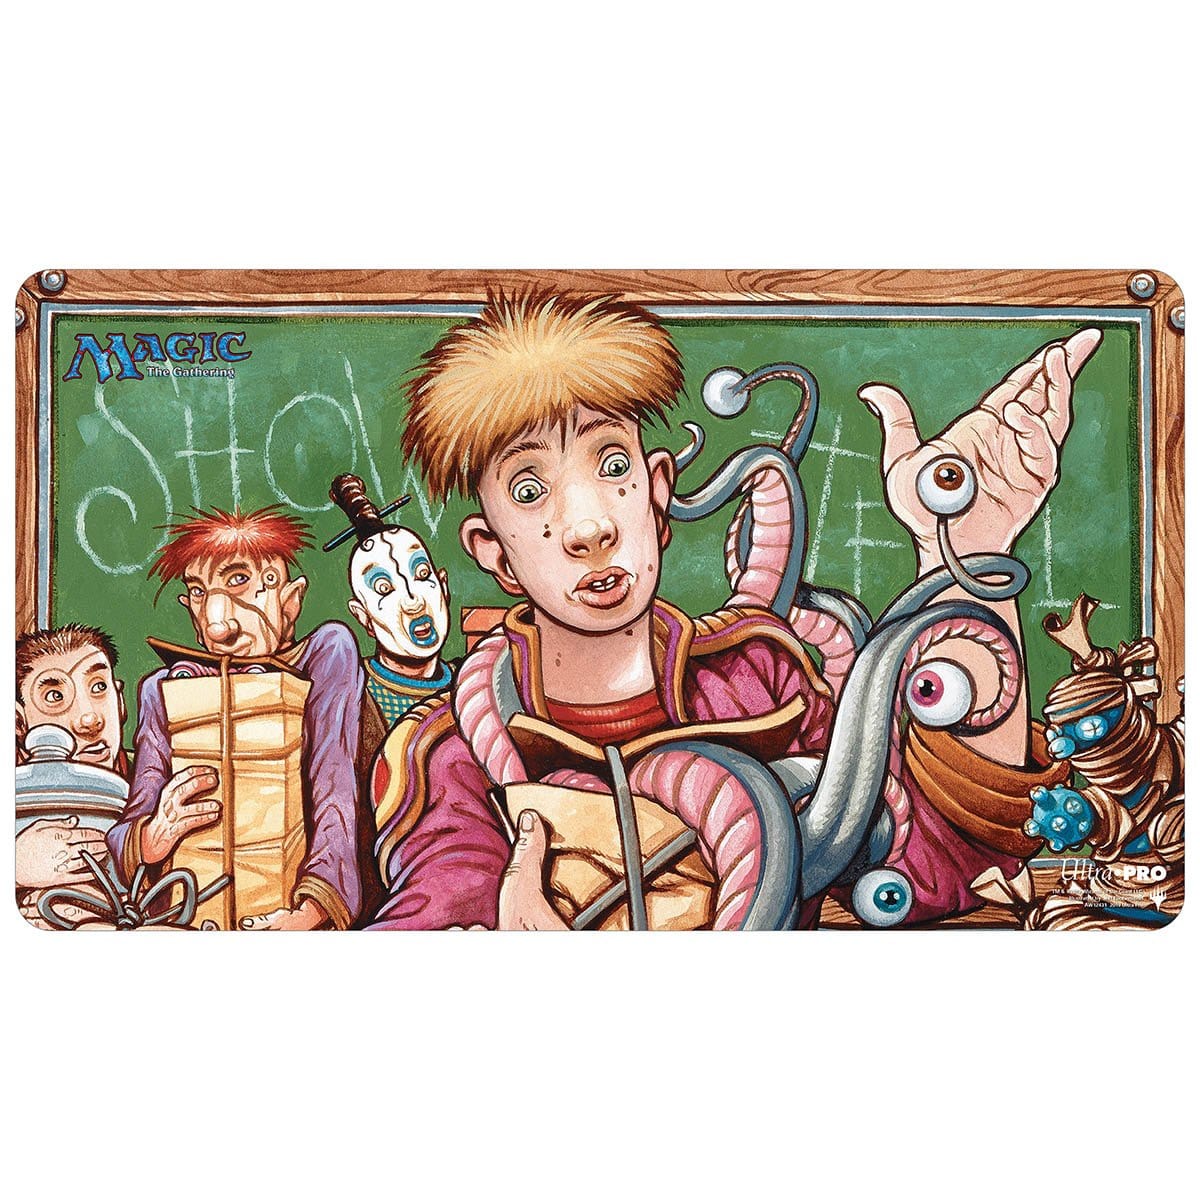 Show and Tell Playmat - Playmat - Original Magic Art - Accessories for Magic the Gathering and other card games